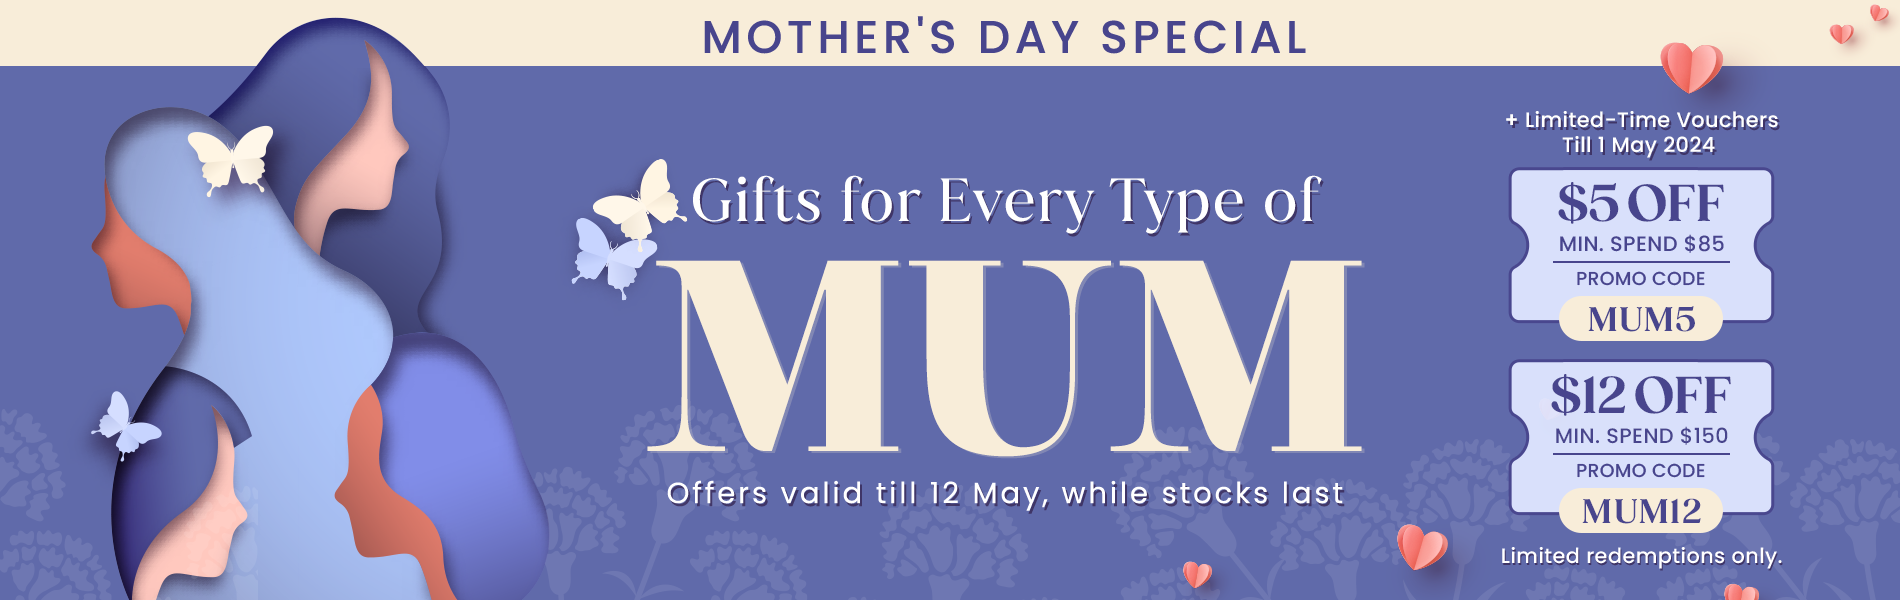 Mother's-Day_Pagefly-Web-Banner.png__PID:e4ba0f40-b527-4abd-9a20-7c253e631b38